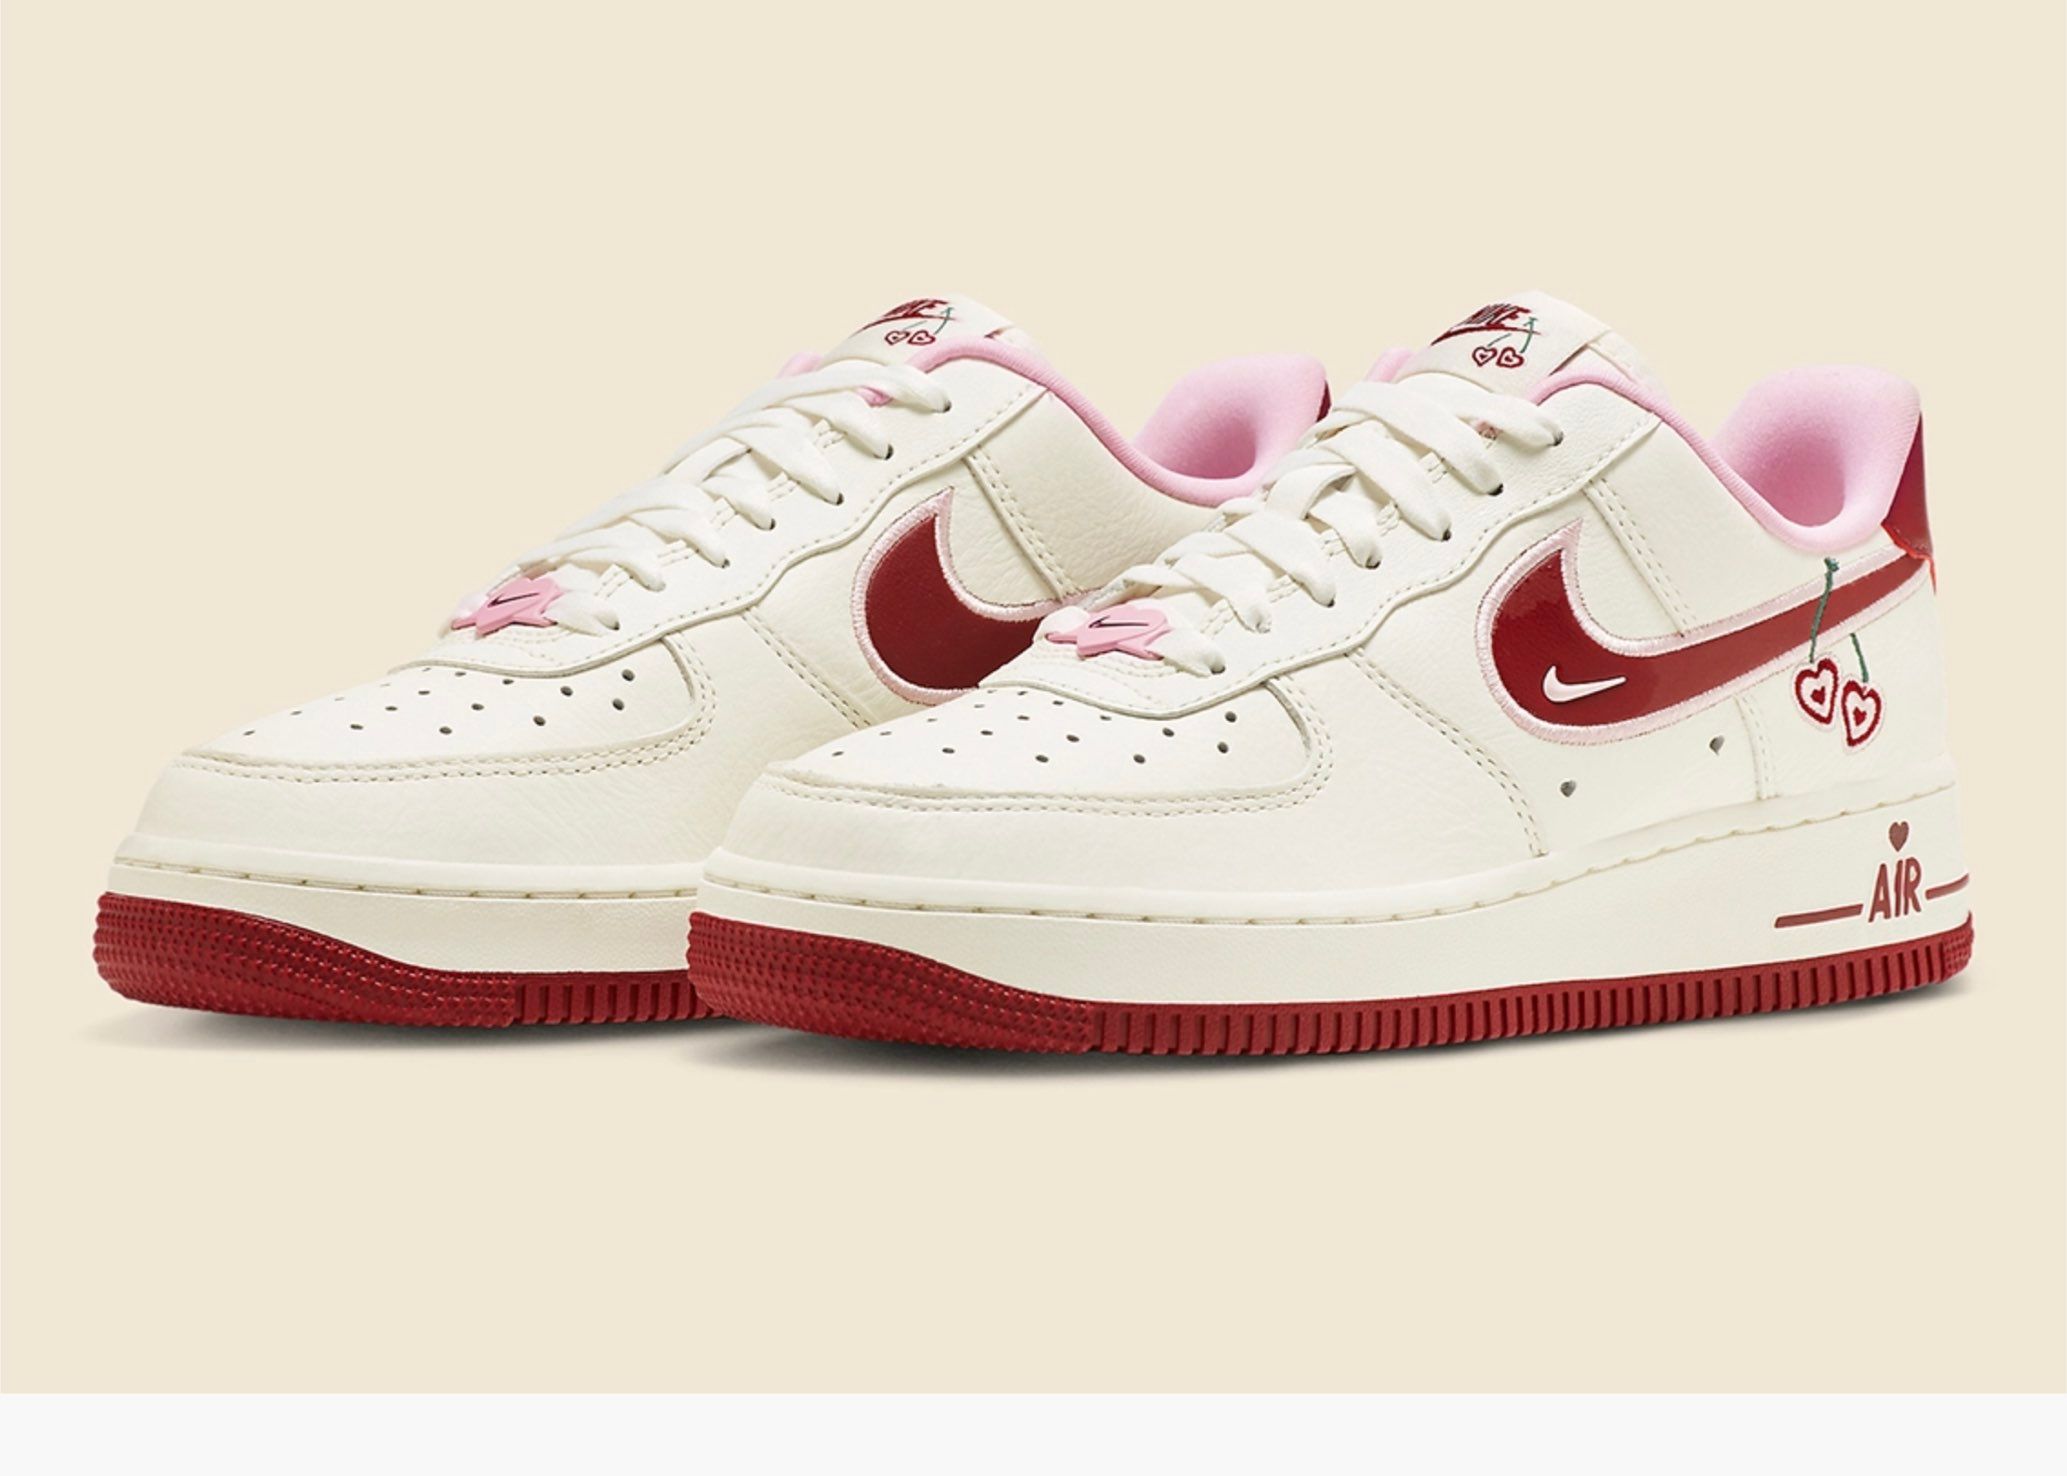 Nike air force low valentine s day. Nike Air Force 1 Low “Valentine’s Day” 2023. Nike Air Force 1 Low Valentine s Day 2023. Nike Air Force 1 Valentine's Day 2023. Nike Air Force Valentines Day 2023.